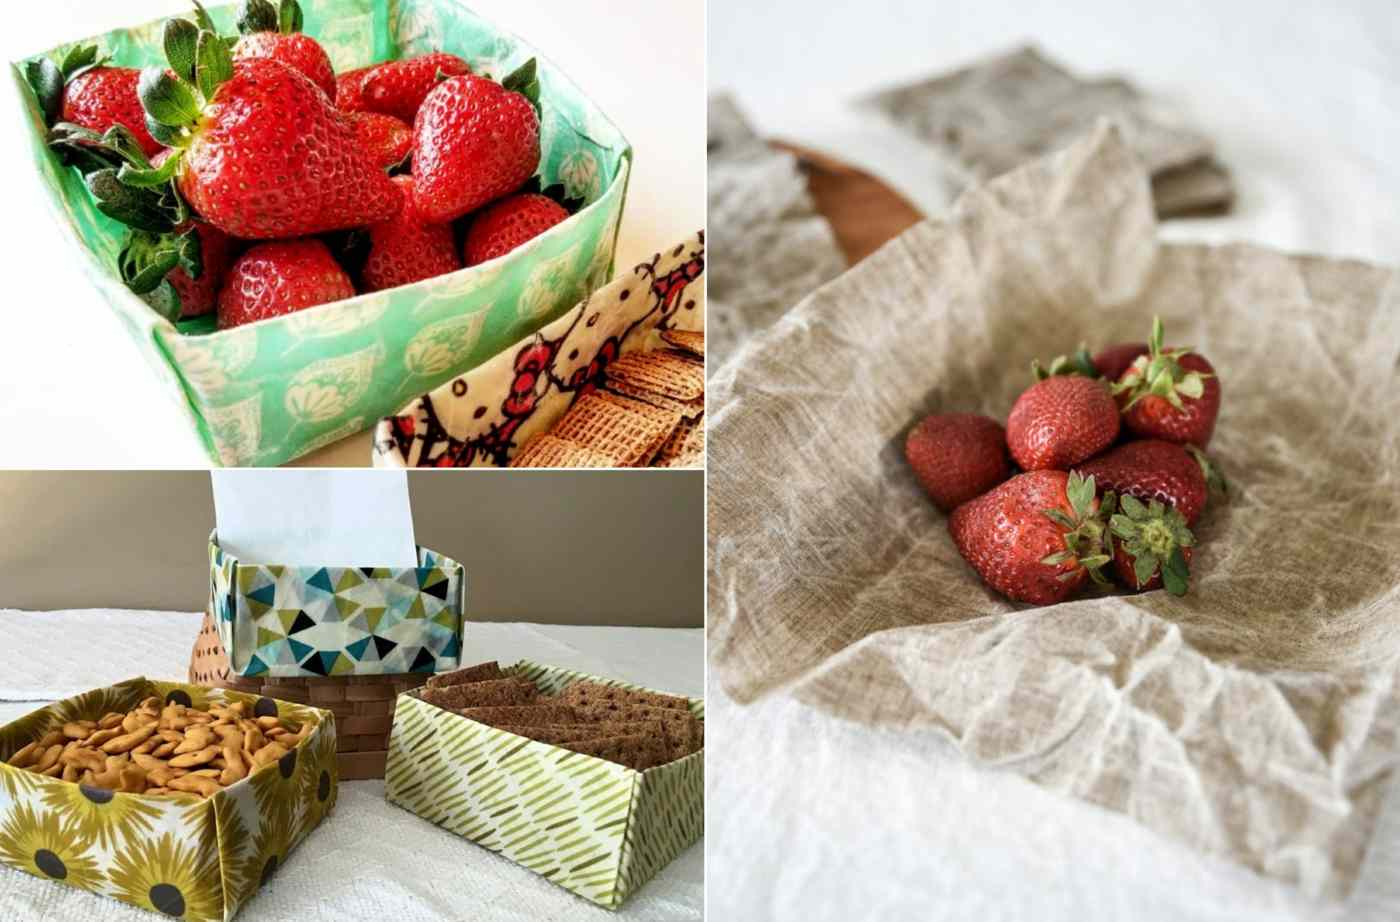 Quickly and easily a tray with growers for storing fruit and nuts